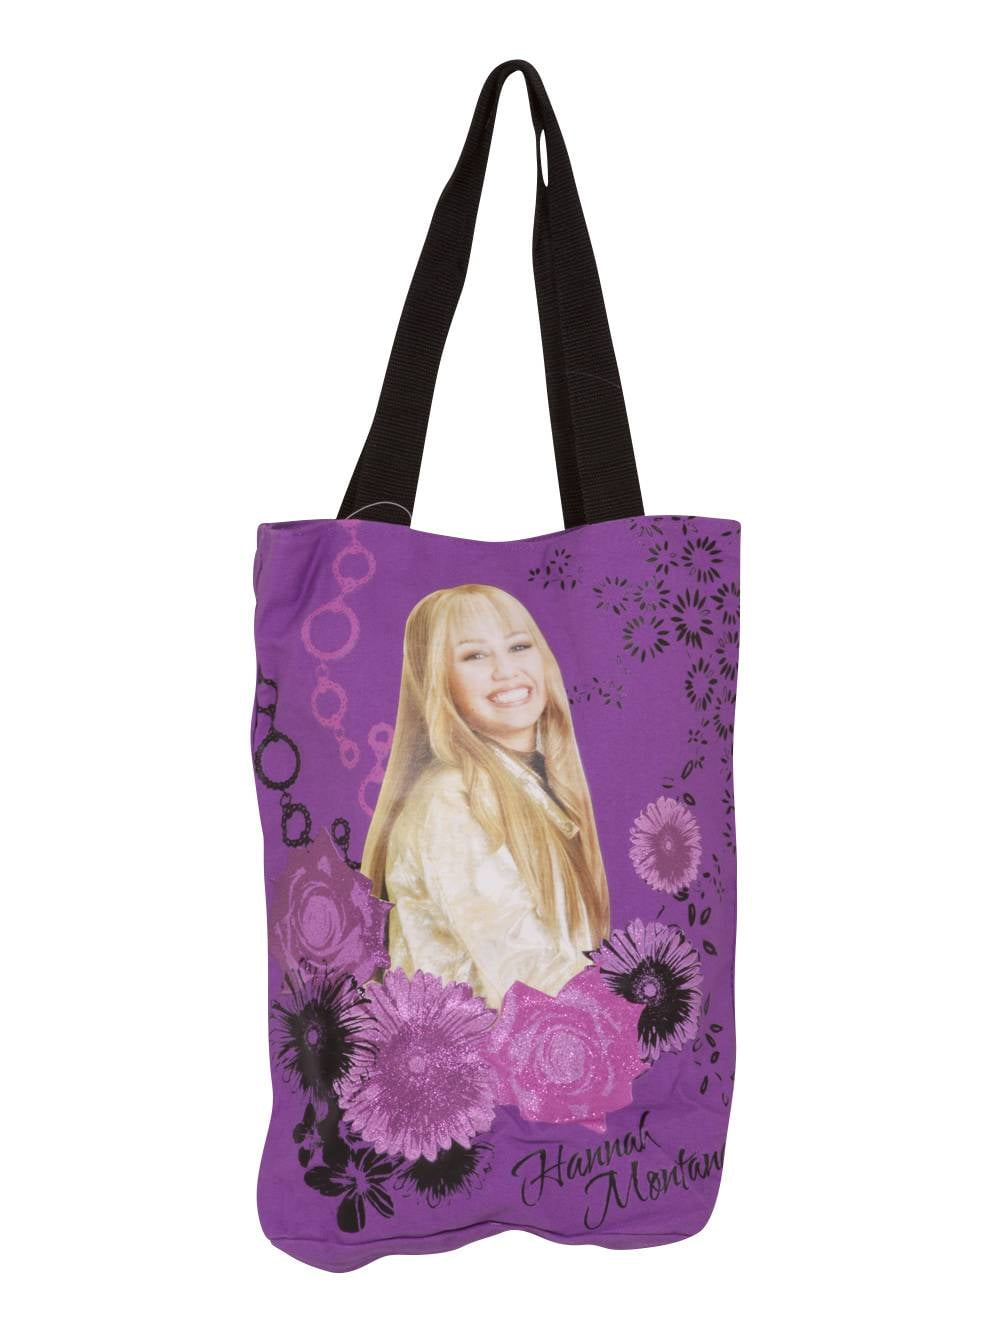 Hannah Montana Tote Bag Disney Channel Purple With Pink and Black Flowers